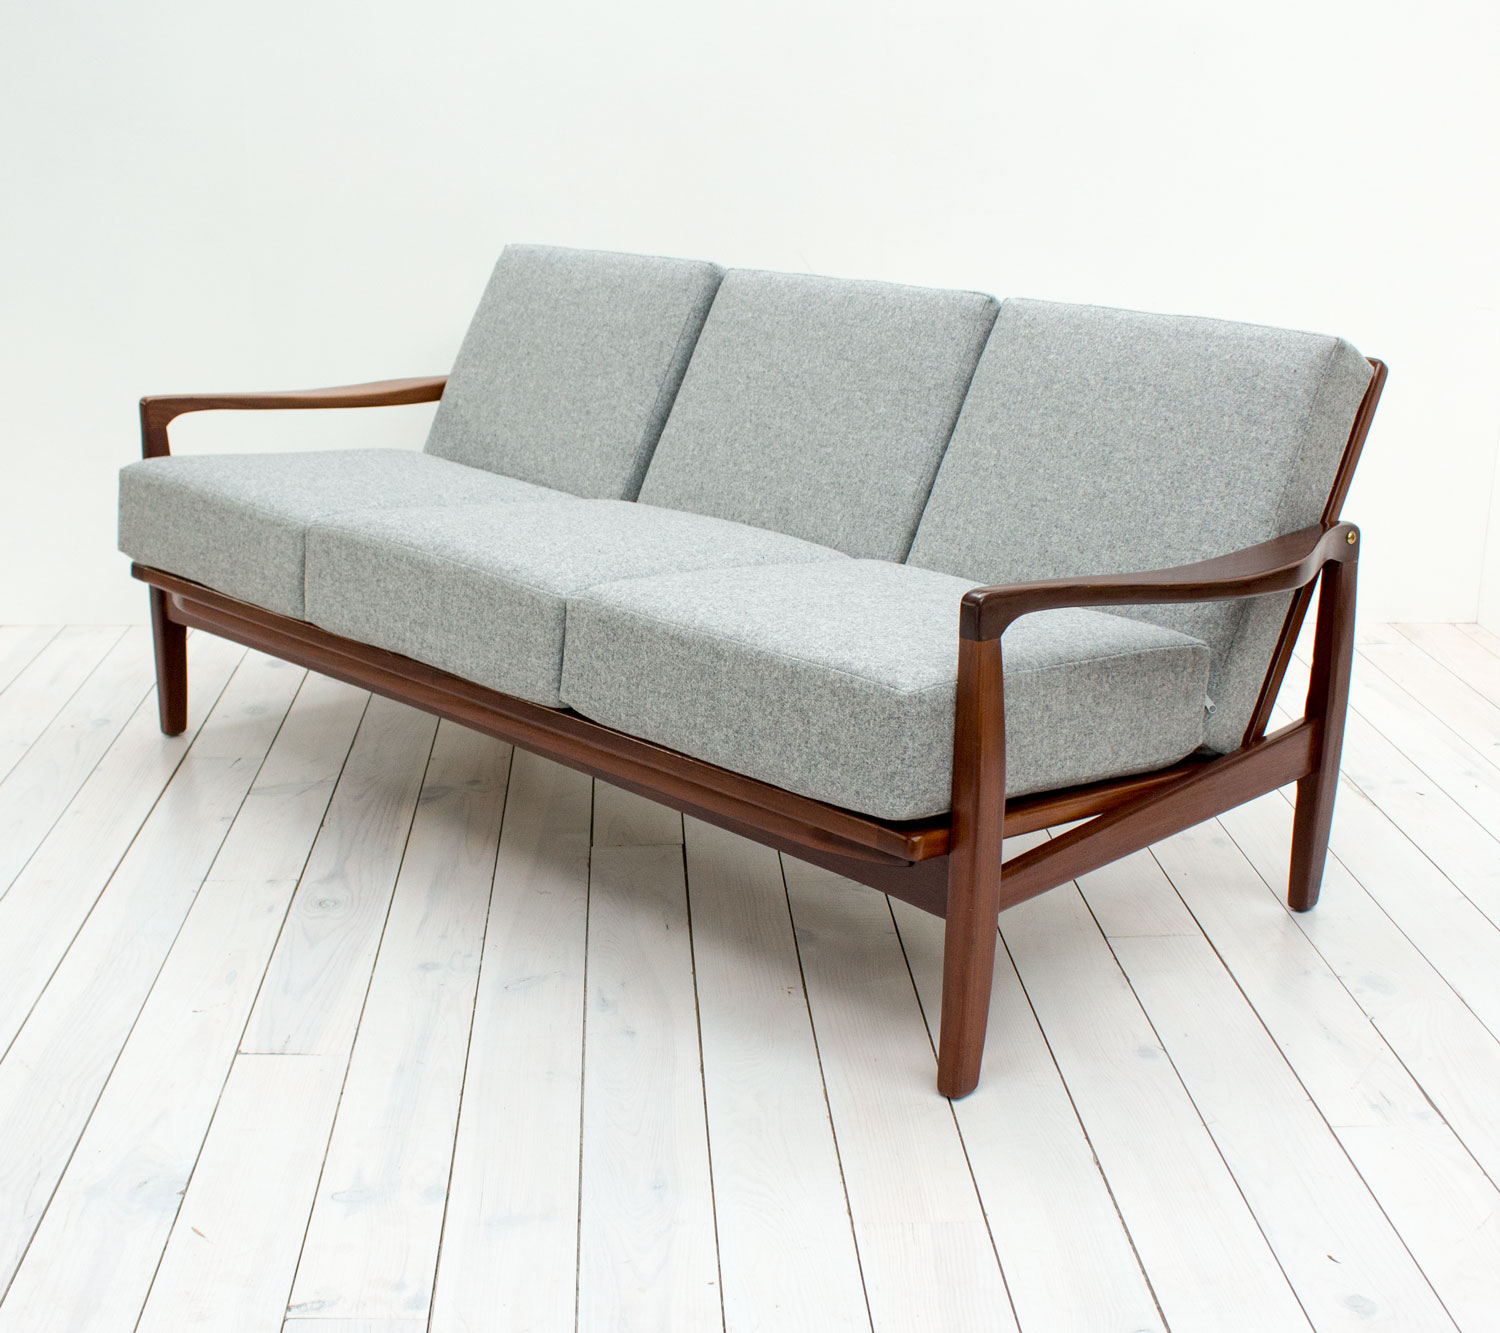 1960s Toothill Afromosia 3 Seater Sofa